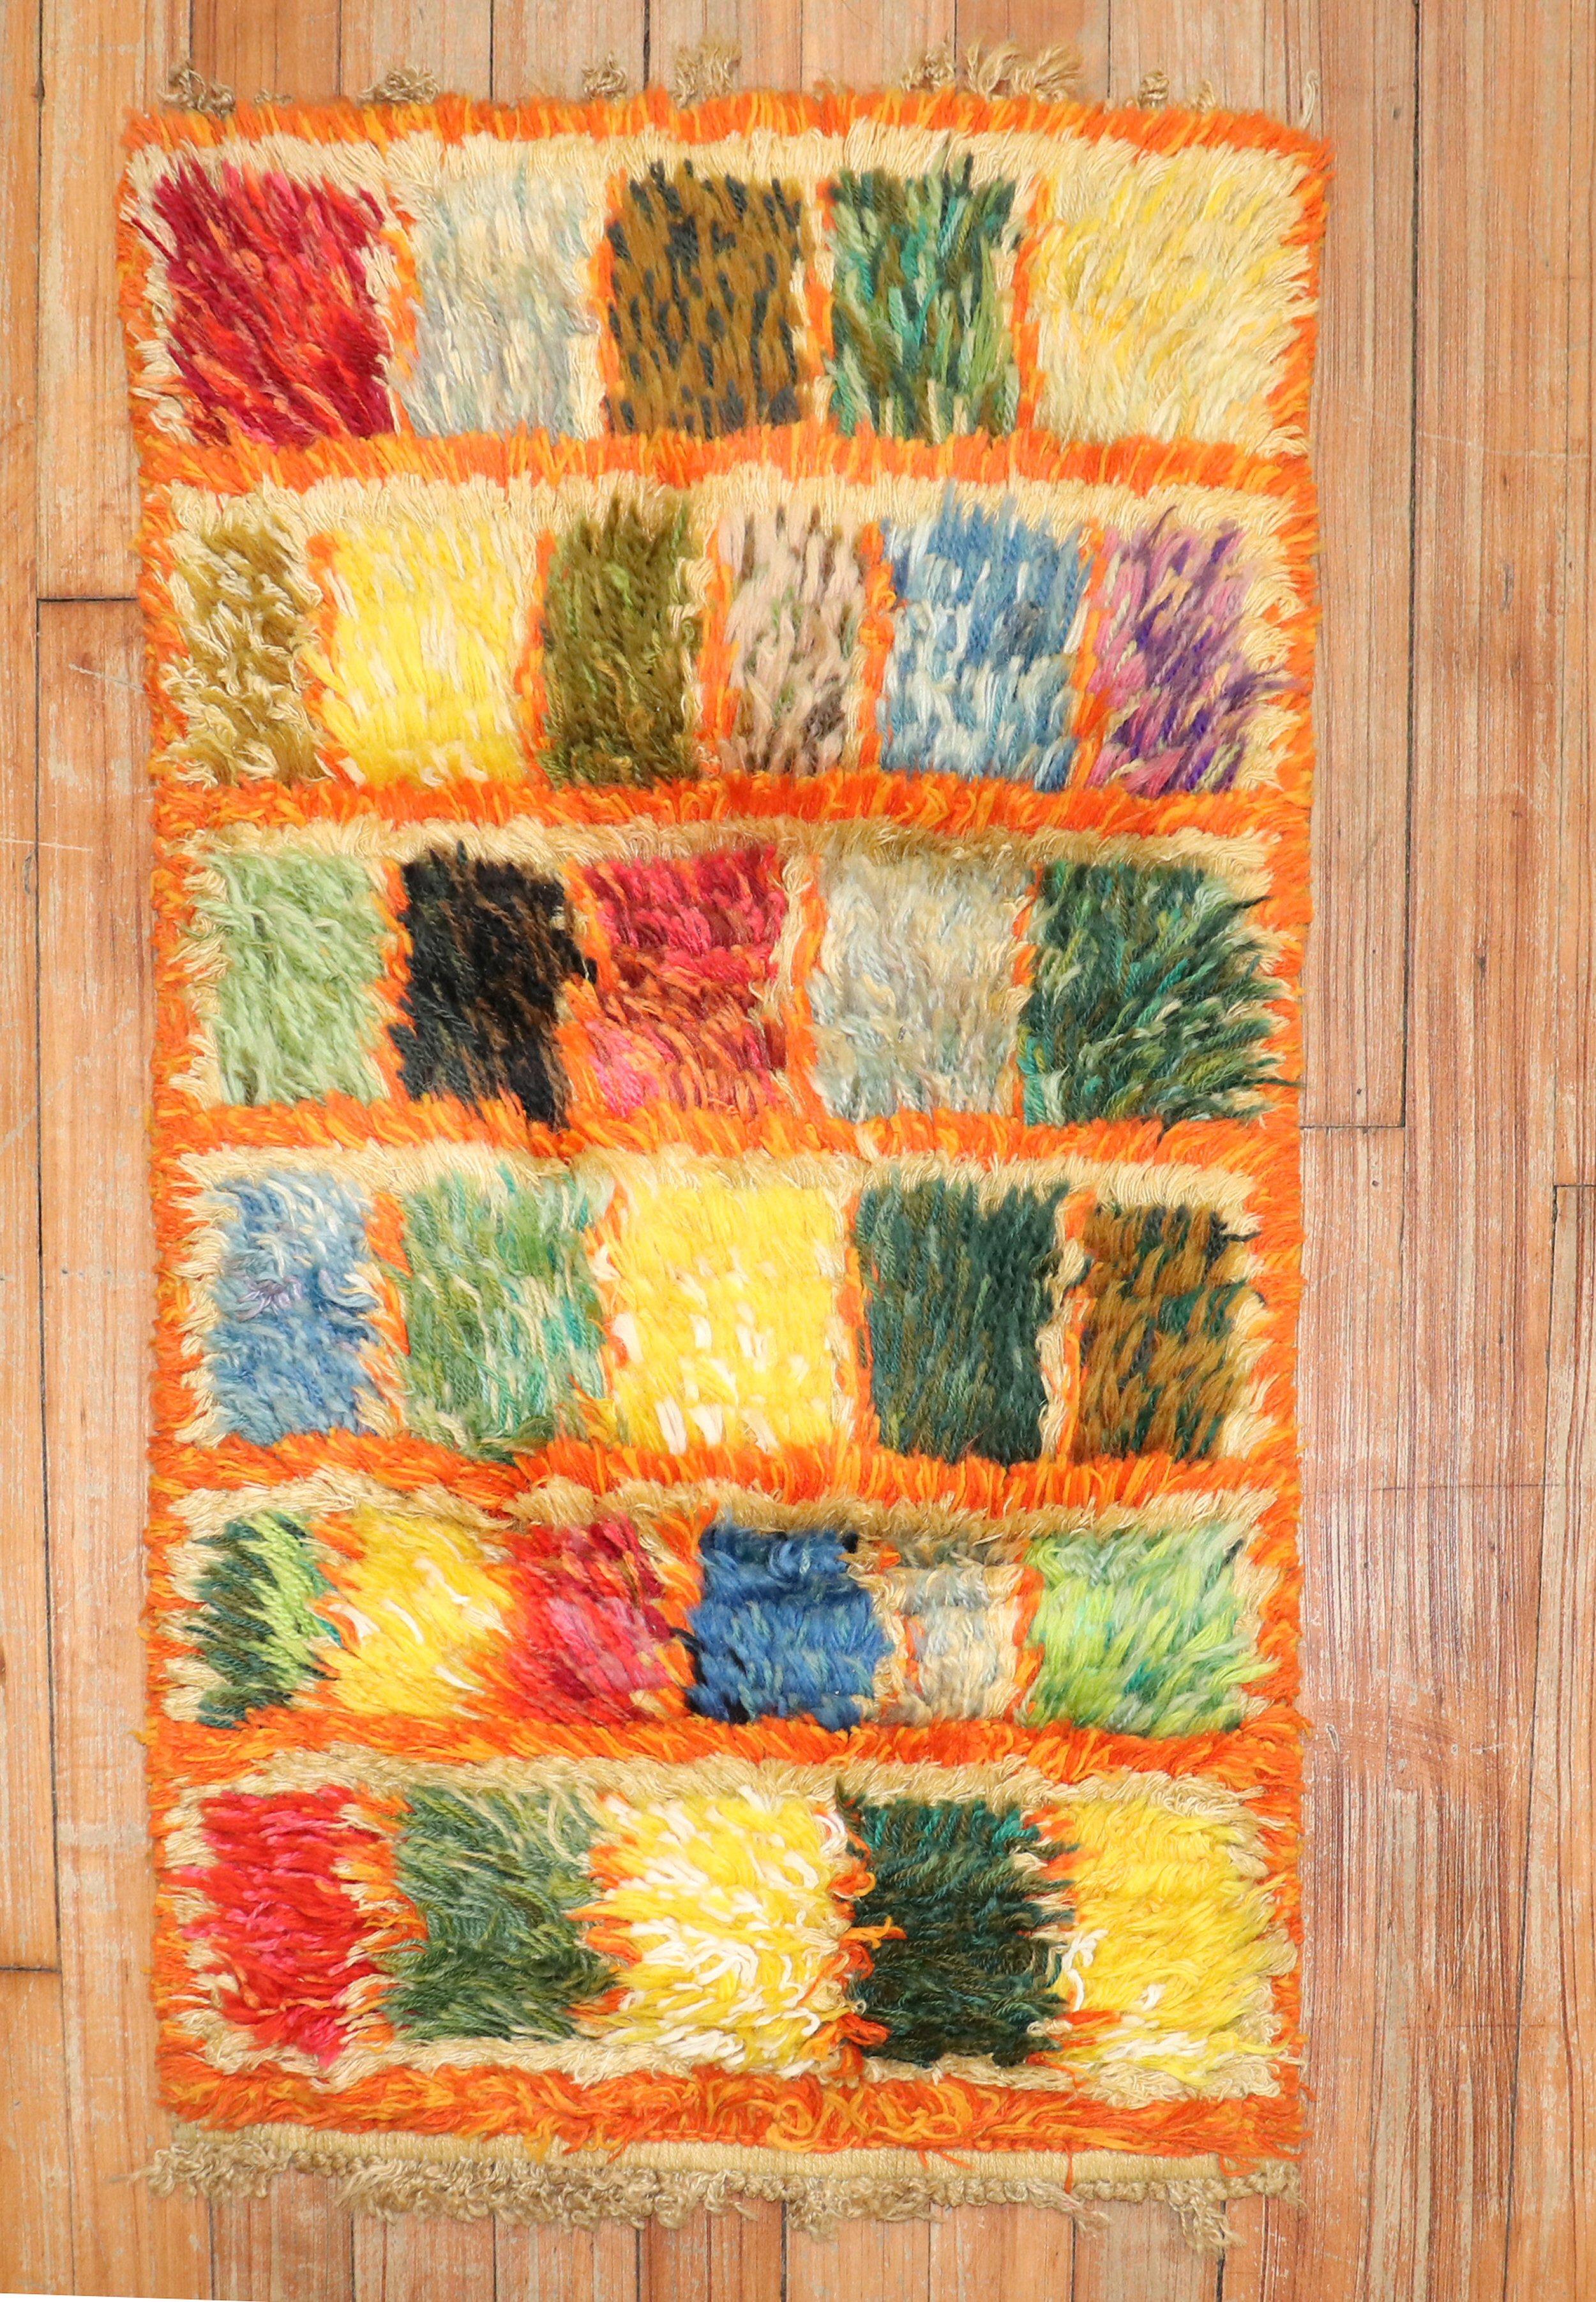 Marvelous small plush Swedish Rya rug from the 3rd quarter of the 20th century.

Measures: 1'5” x 2'6”

Swedish Rya rugs are extremely colorful, lovely and quite chic and each have their own character to them. They tend to have thicker shaggy